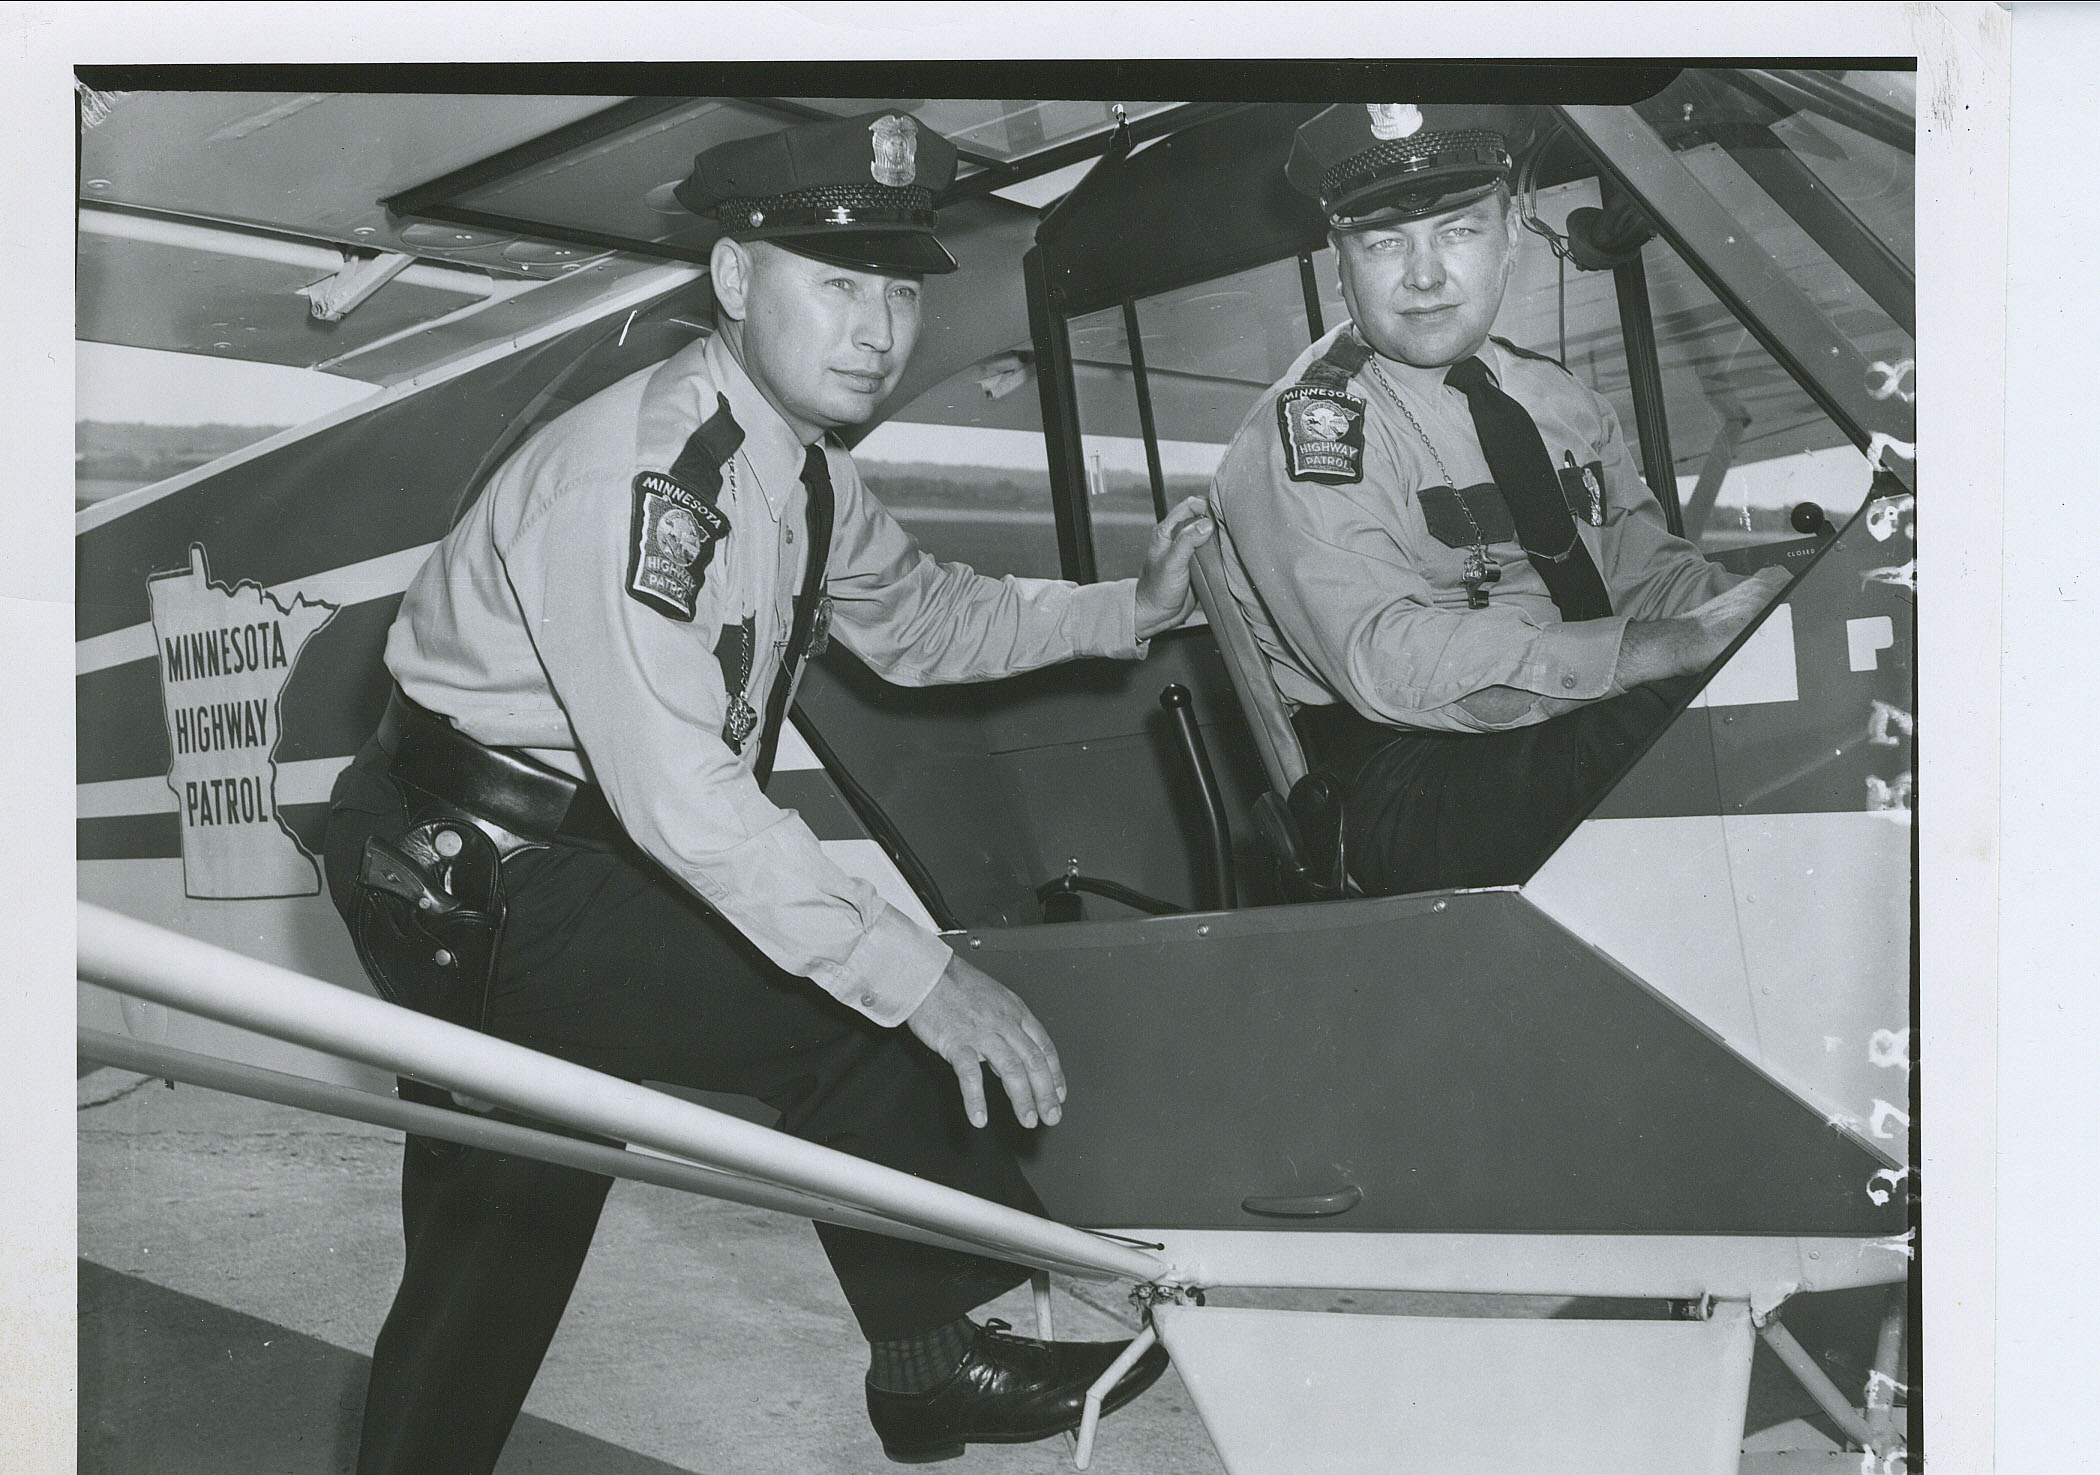 Two troopers posing with an early fixed-wing aircraft